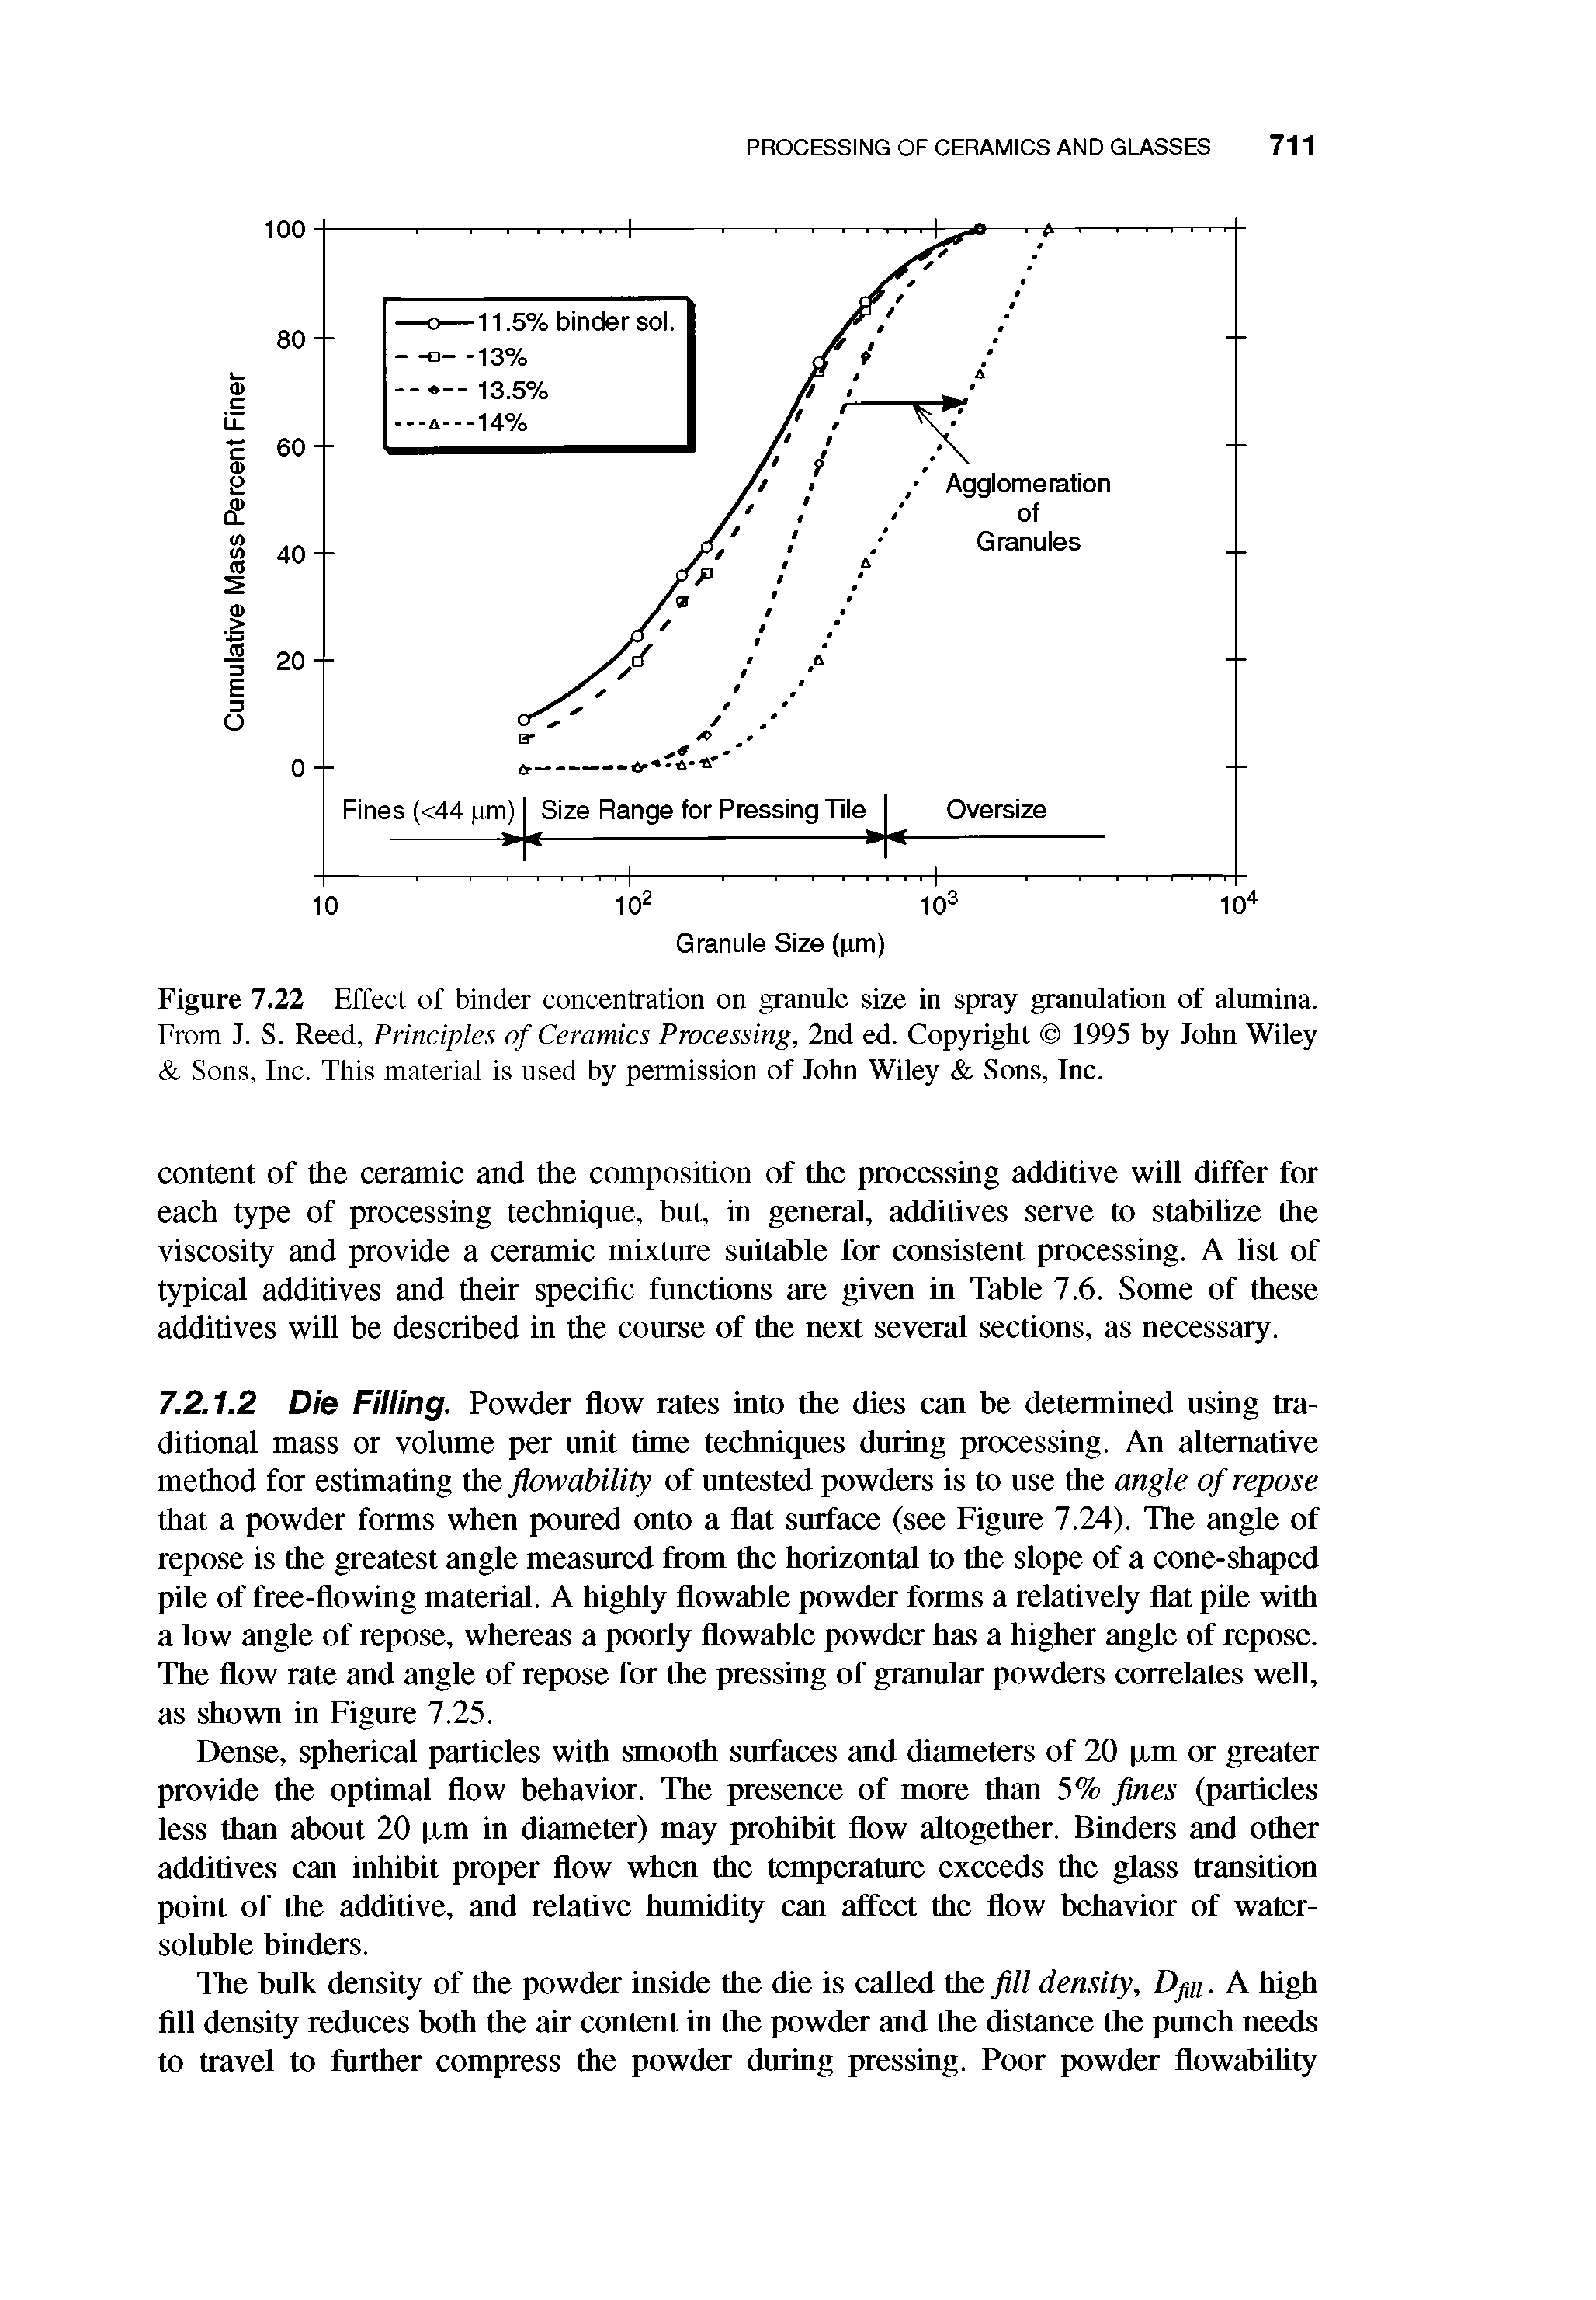 Figure 7.22 Effect of binder concentration on granule size in spray granulation of alumina. From J. S. Reed, Principles of Ceramics Processing, 2nd ed. Copyright 1995 by John Wiley Sons, Inc. This material is used by permission of John Wiley Sons, Inc.